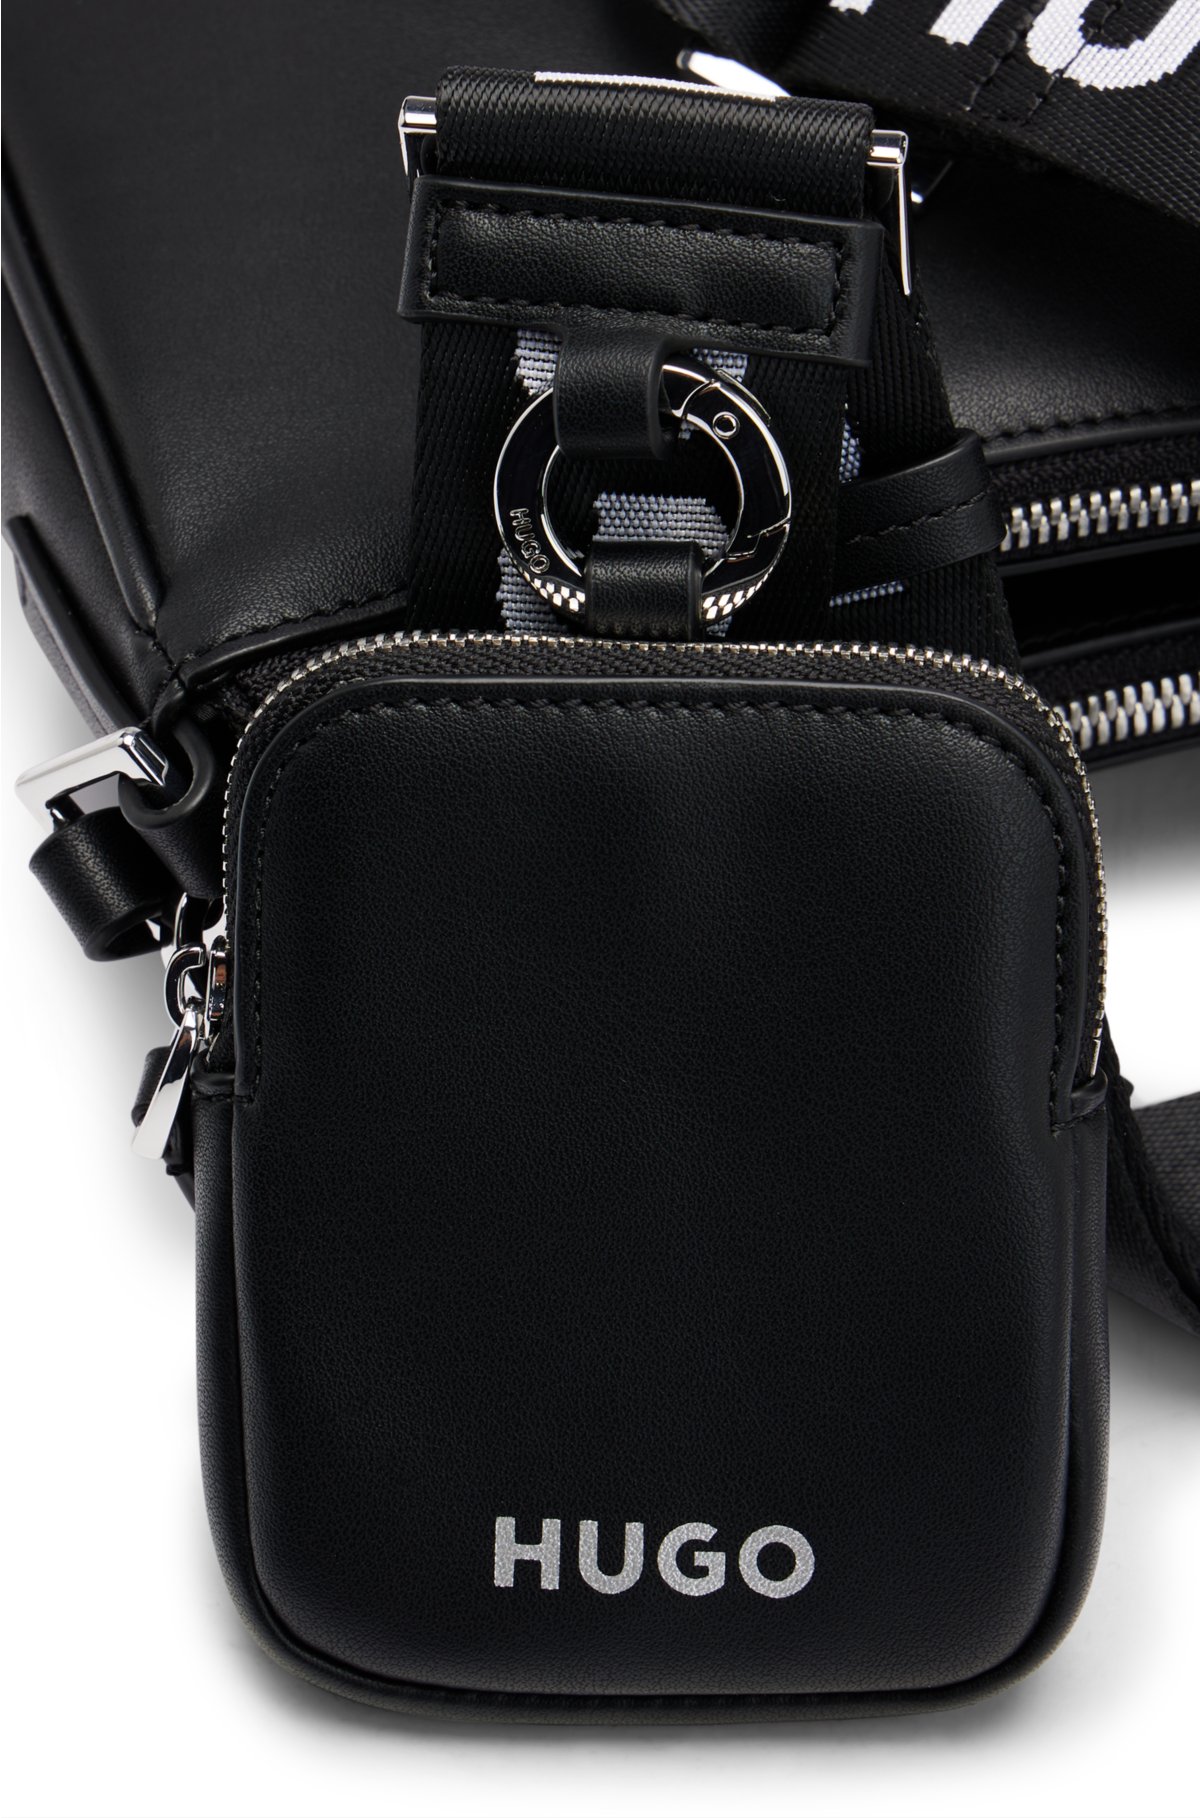 HUGO Crossbody and debossed pouches bag branding with detachable -